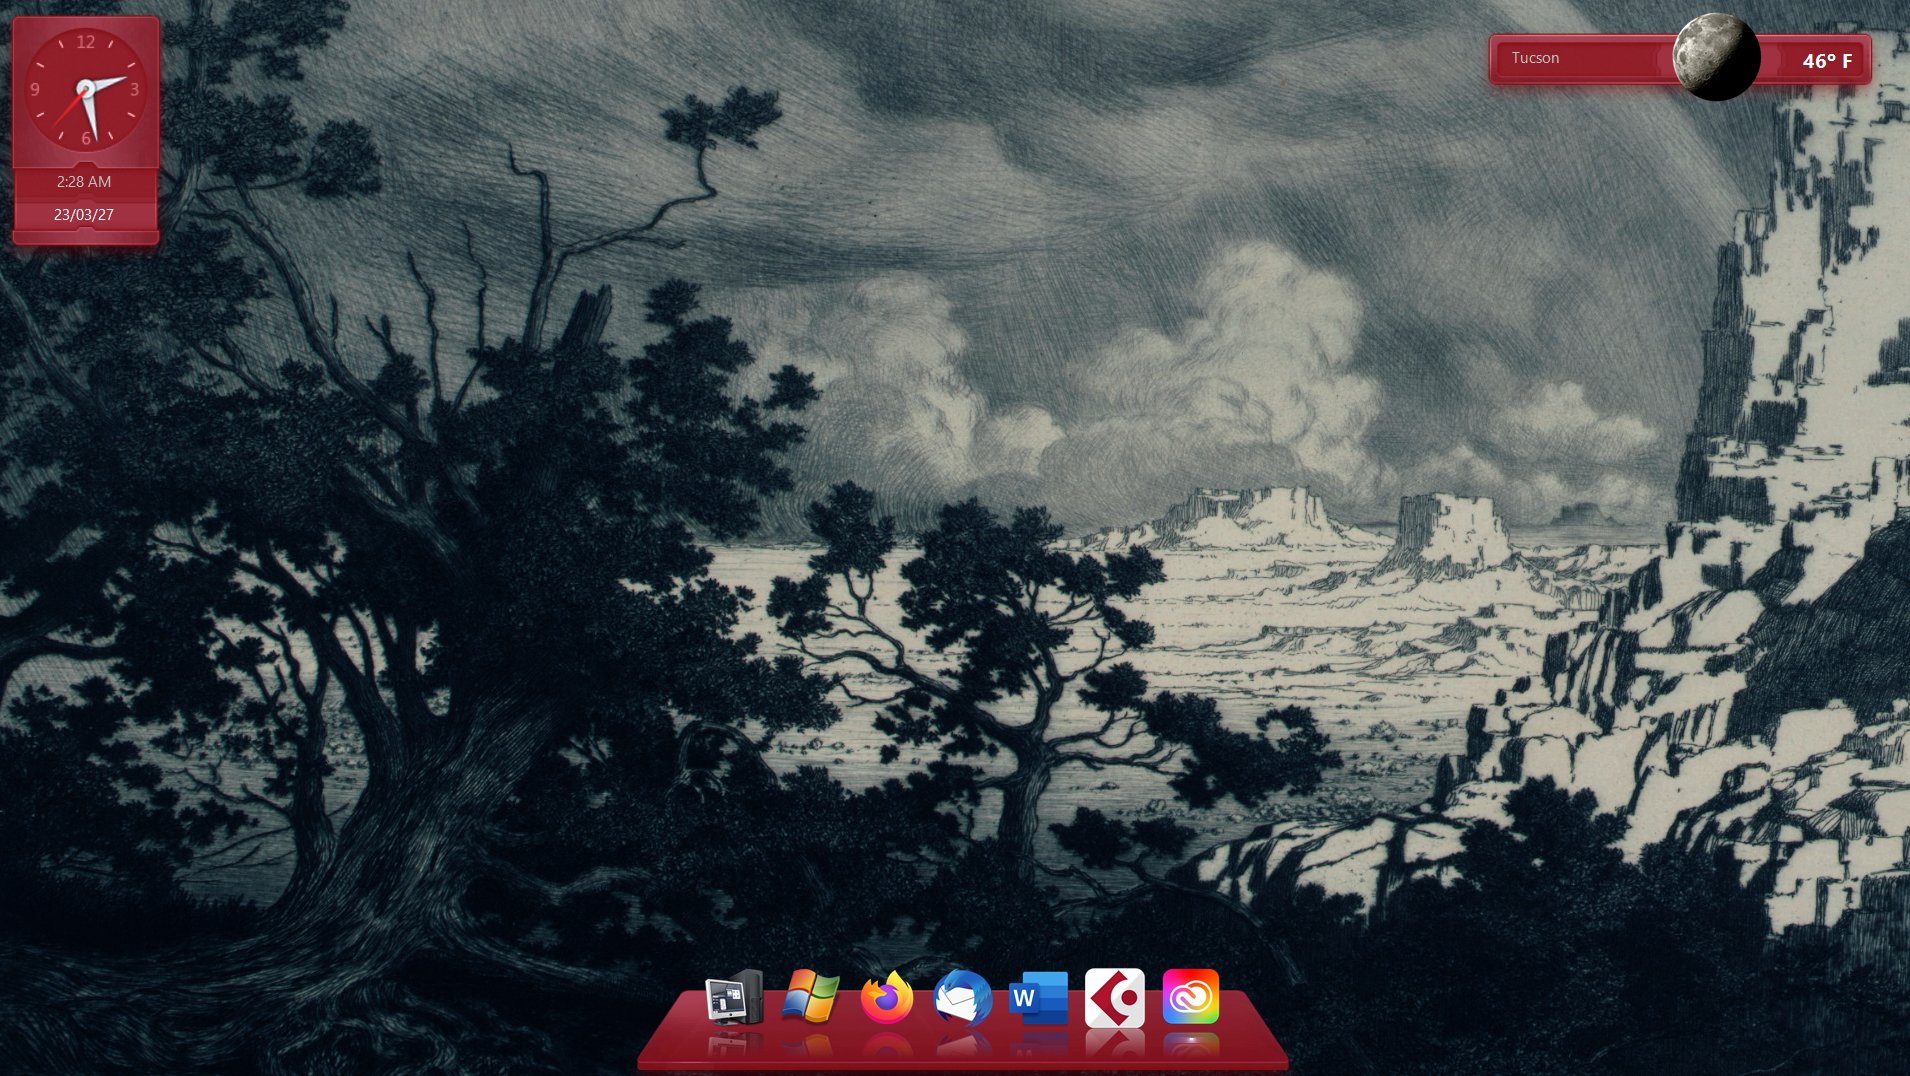 windows 10 desktop only featuring a dock, a clock, and the weather, the background is a cropped version of The Edge of the Desert, Arizona by George Elbert Burr which is a landscape drawing of some trees overlooking the desert and it's cloudy